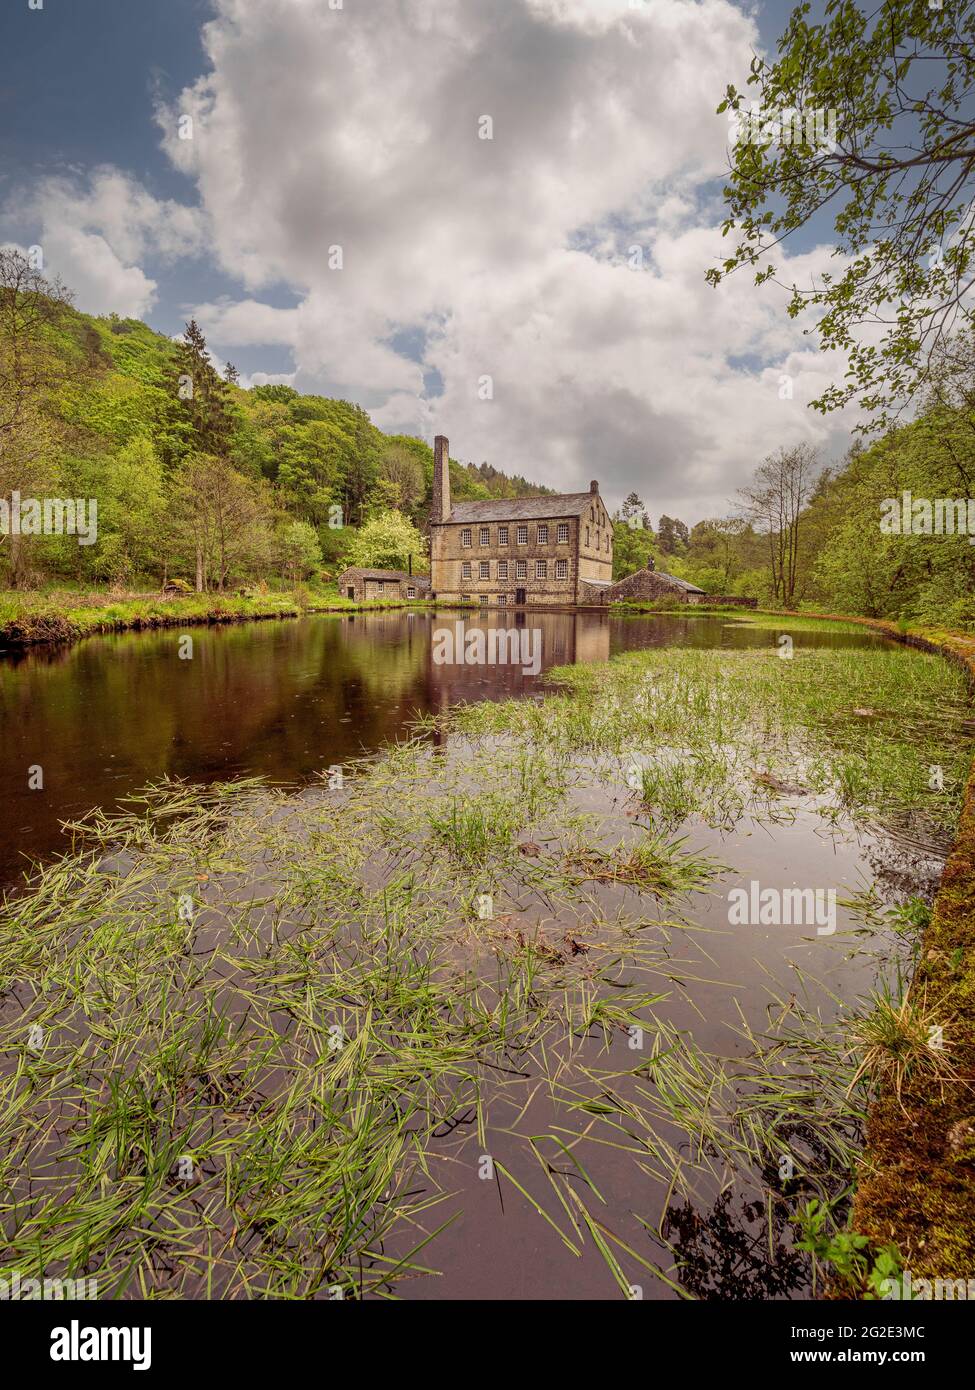 Gibson Mill, a former cotton mill in Hardcastle Crags, wooded Pennine valley in West Yorkshire, England. Now an off-grid visitor attraction. Stock Photo